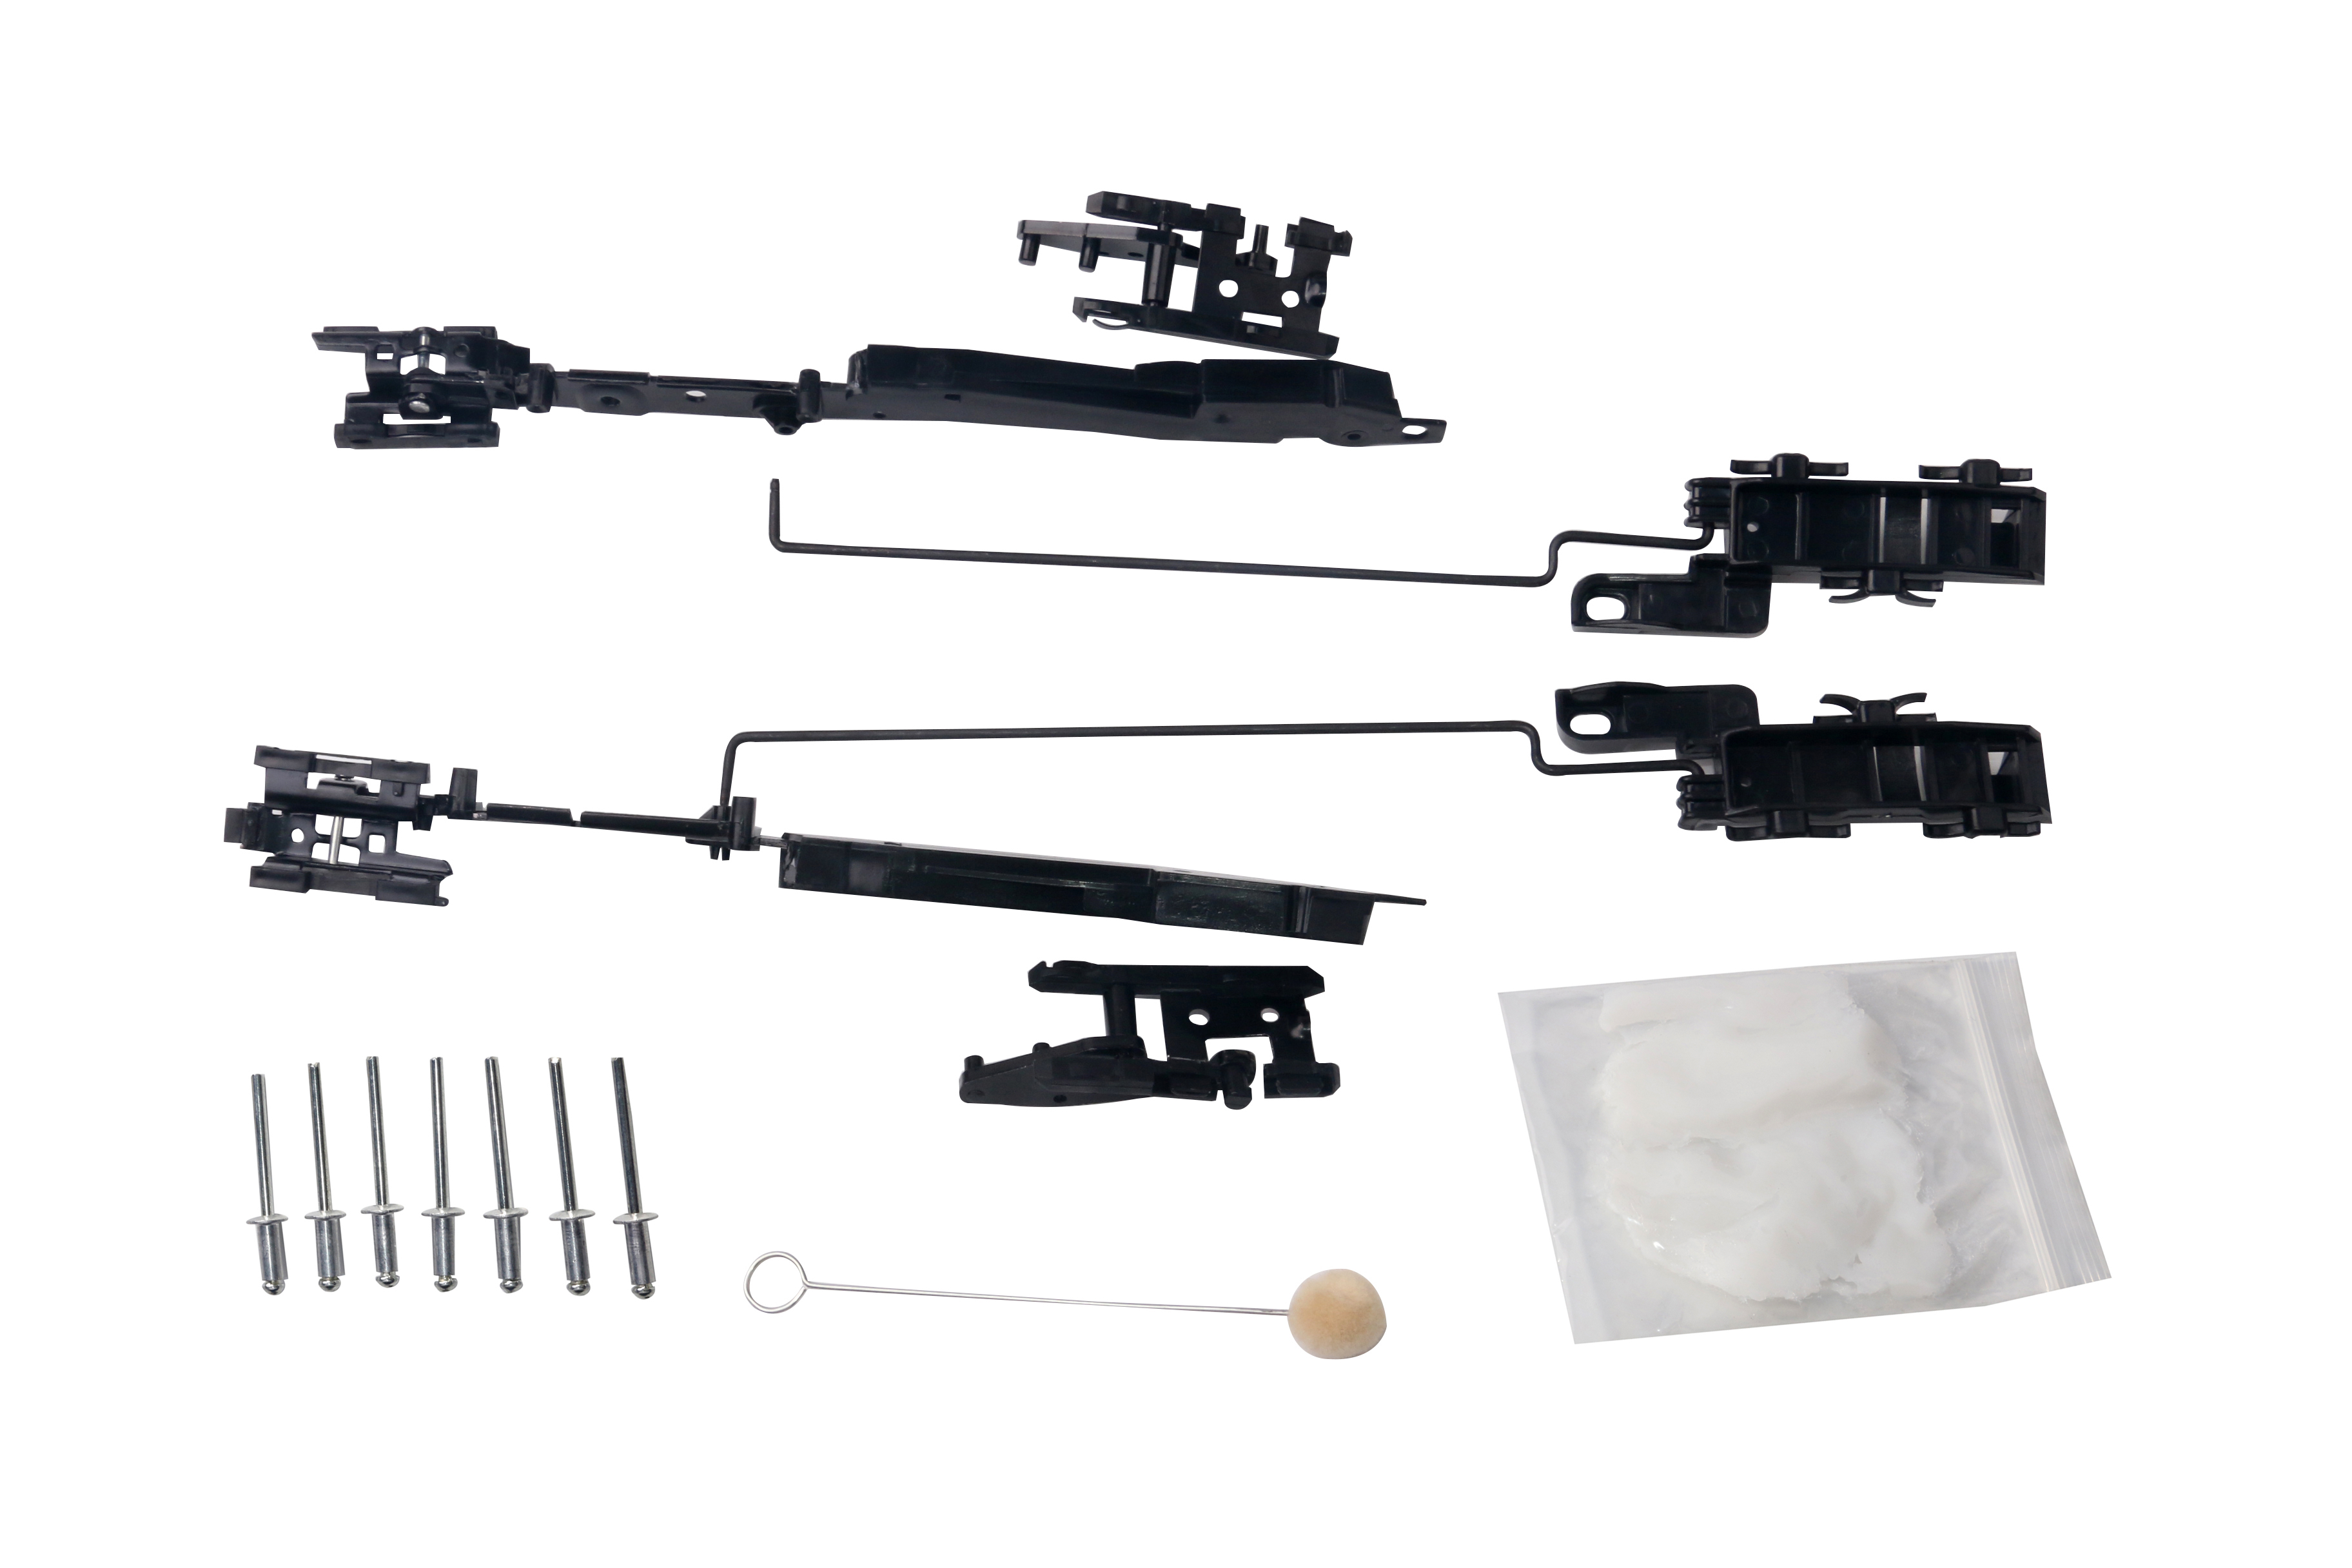 Sunroof Track Assembly Repair Kit - Fits Ford Trucks & SUVs Image